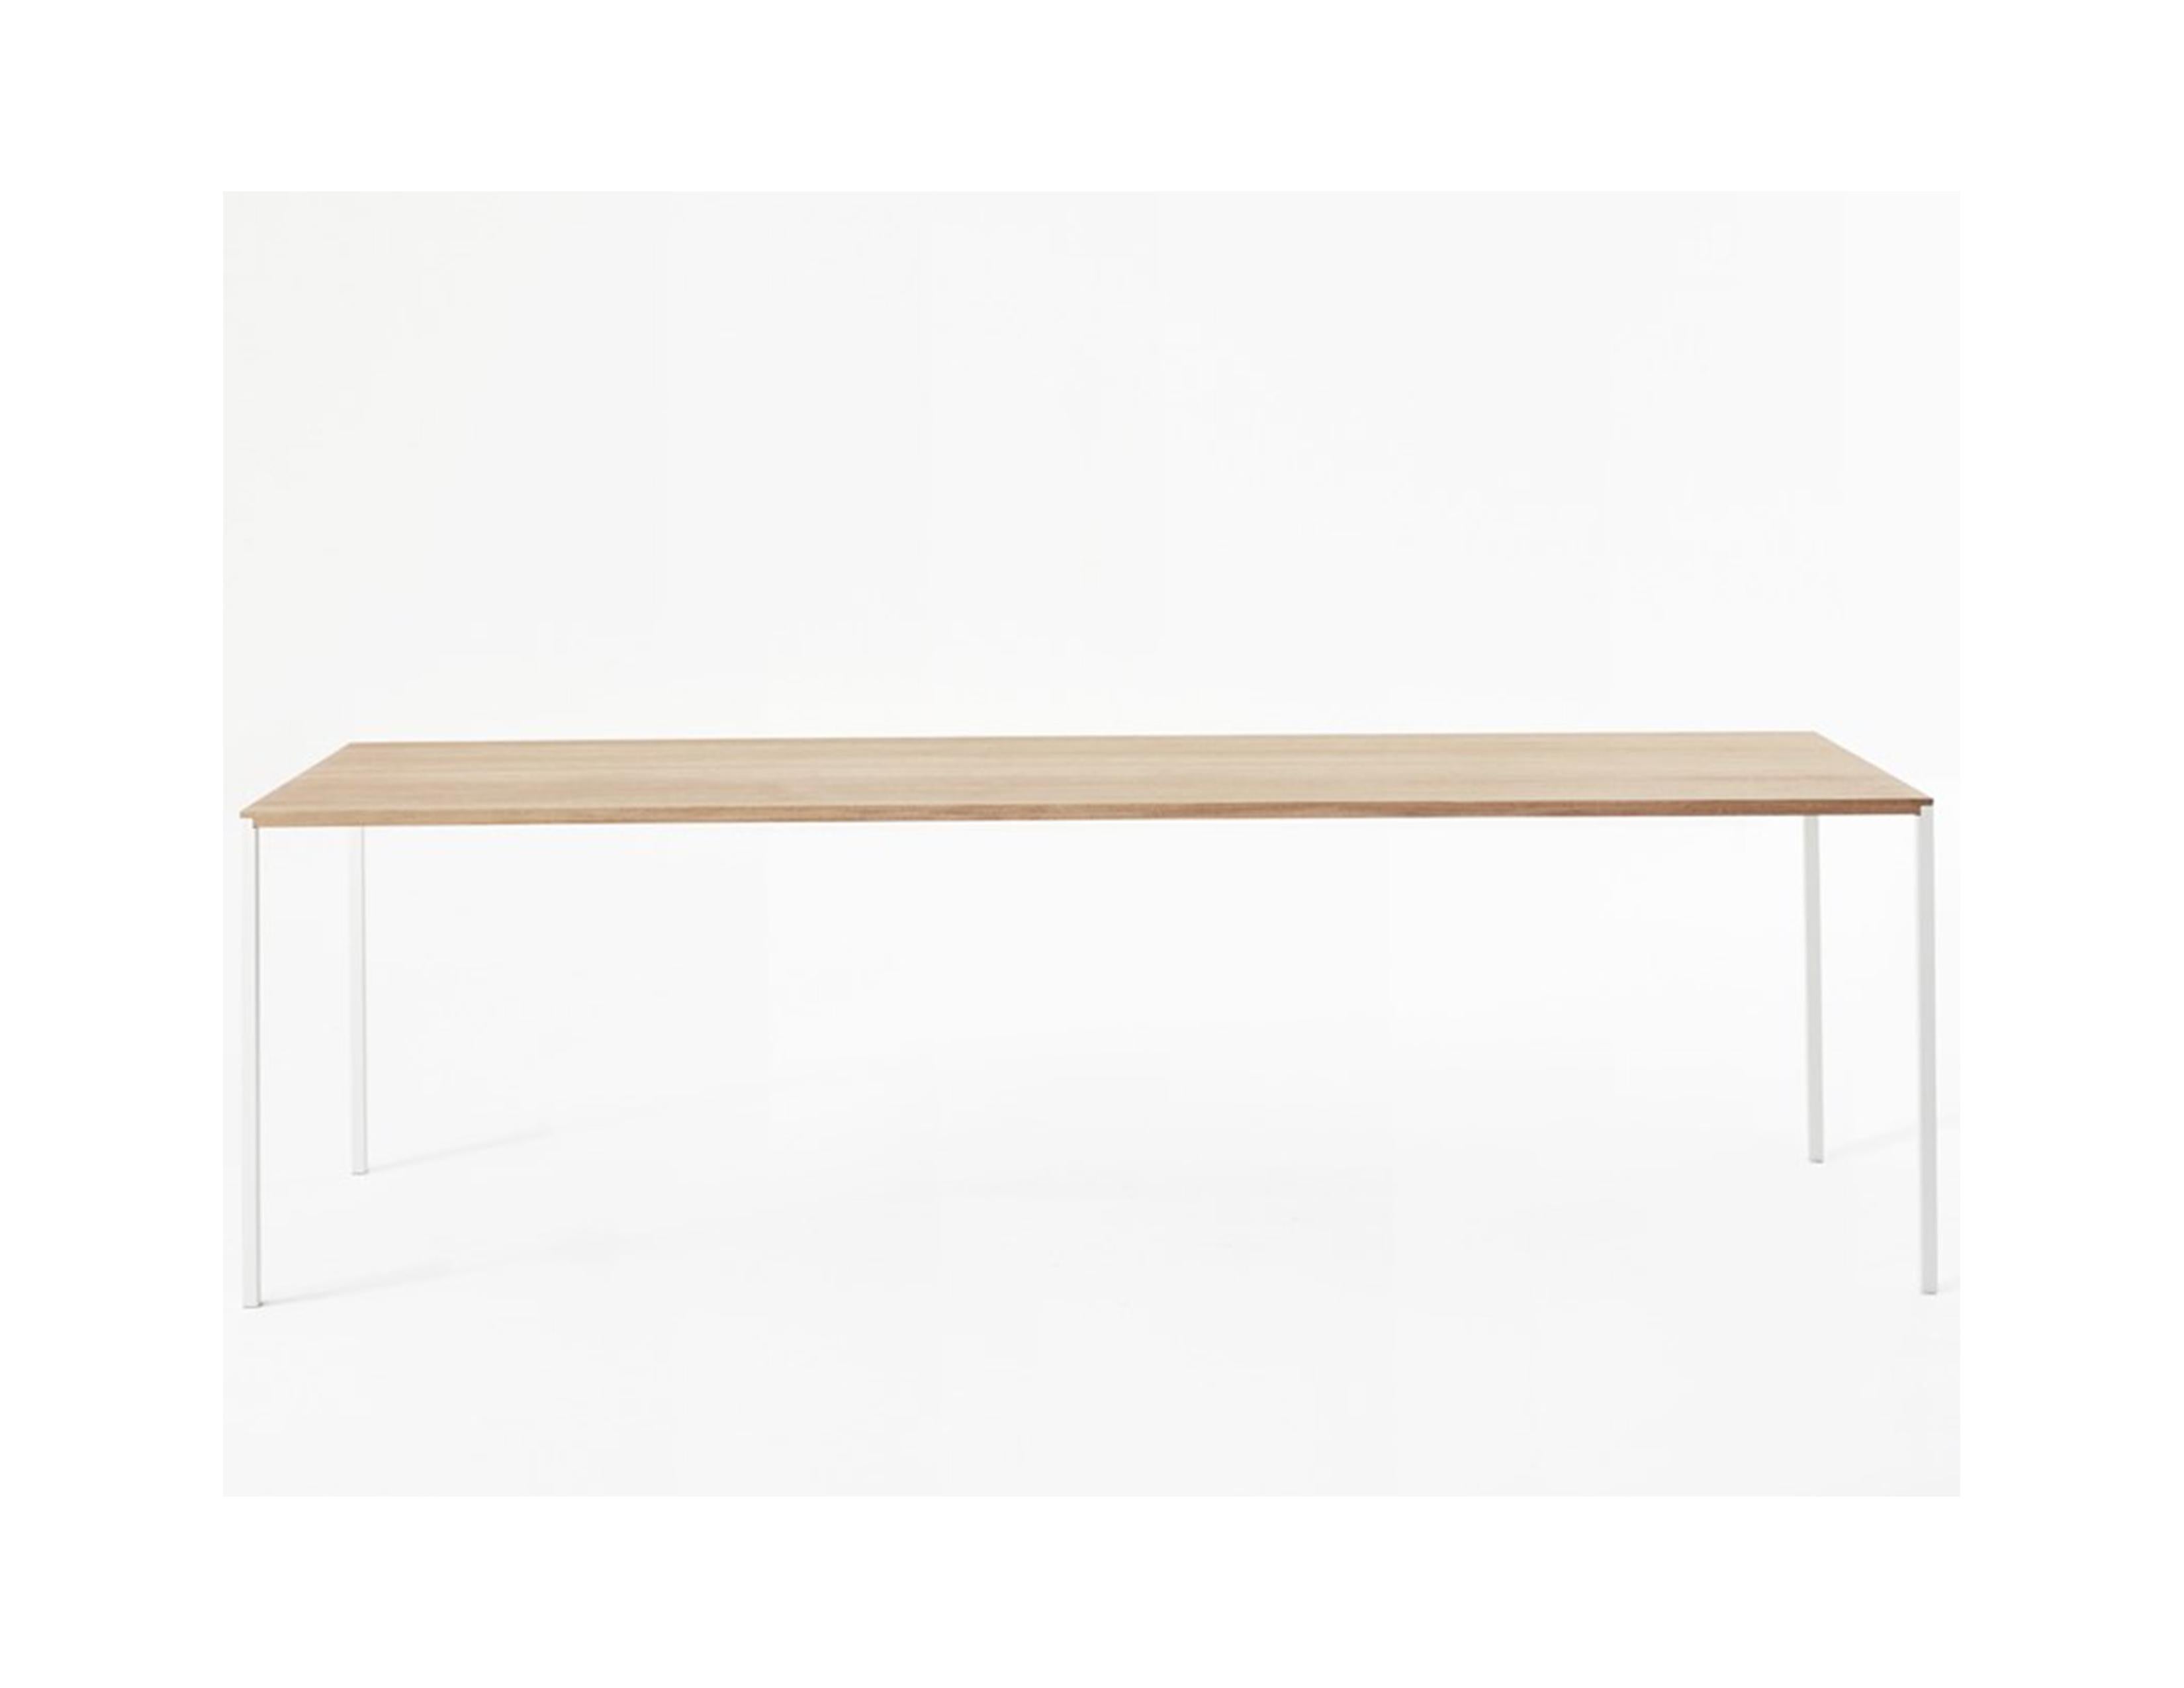 25
Metrica (Bruno Fattorini - Robin Rizzini) · 2011
An archetype table, 25 takes its name from the minimum thickness of the top and leg, precisely 25 mm. The absolute essence of the Avant-Garde, 25 won the 2014 Compasso d'Oro design award for 